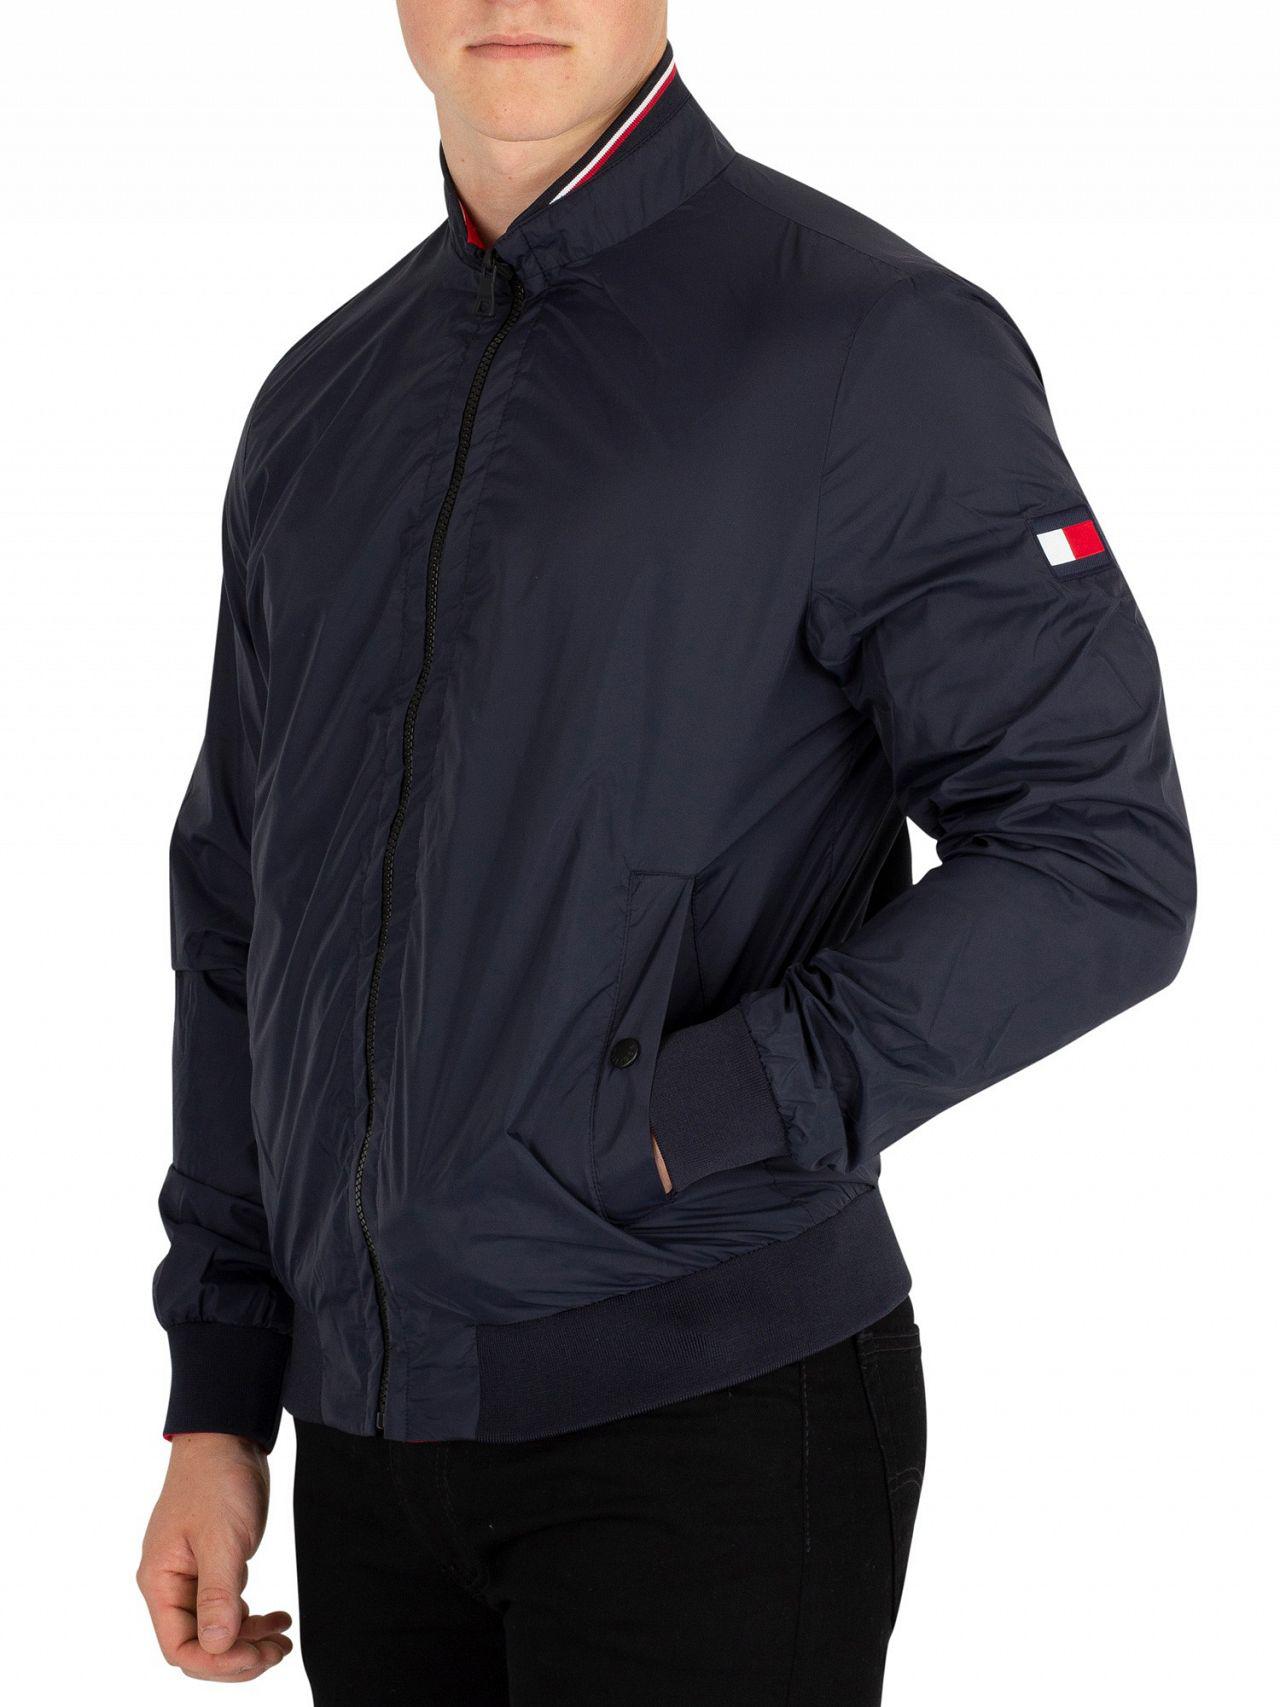 Tommy Hilfiger Synthetic Sky Reversible Bomber Jacket for Men - Lyst